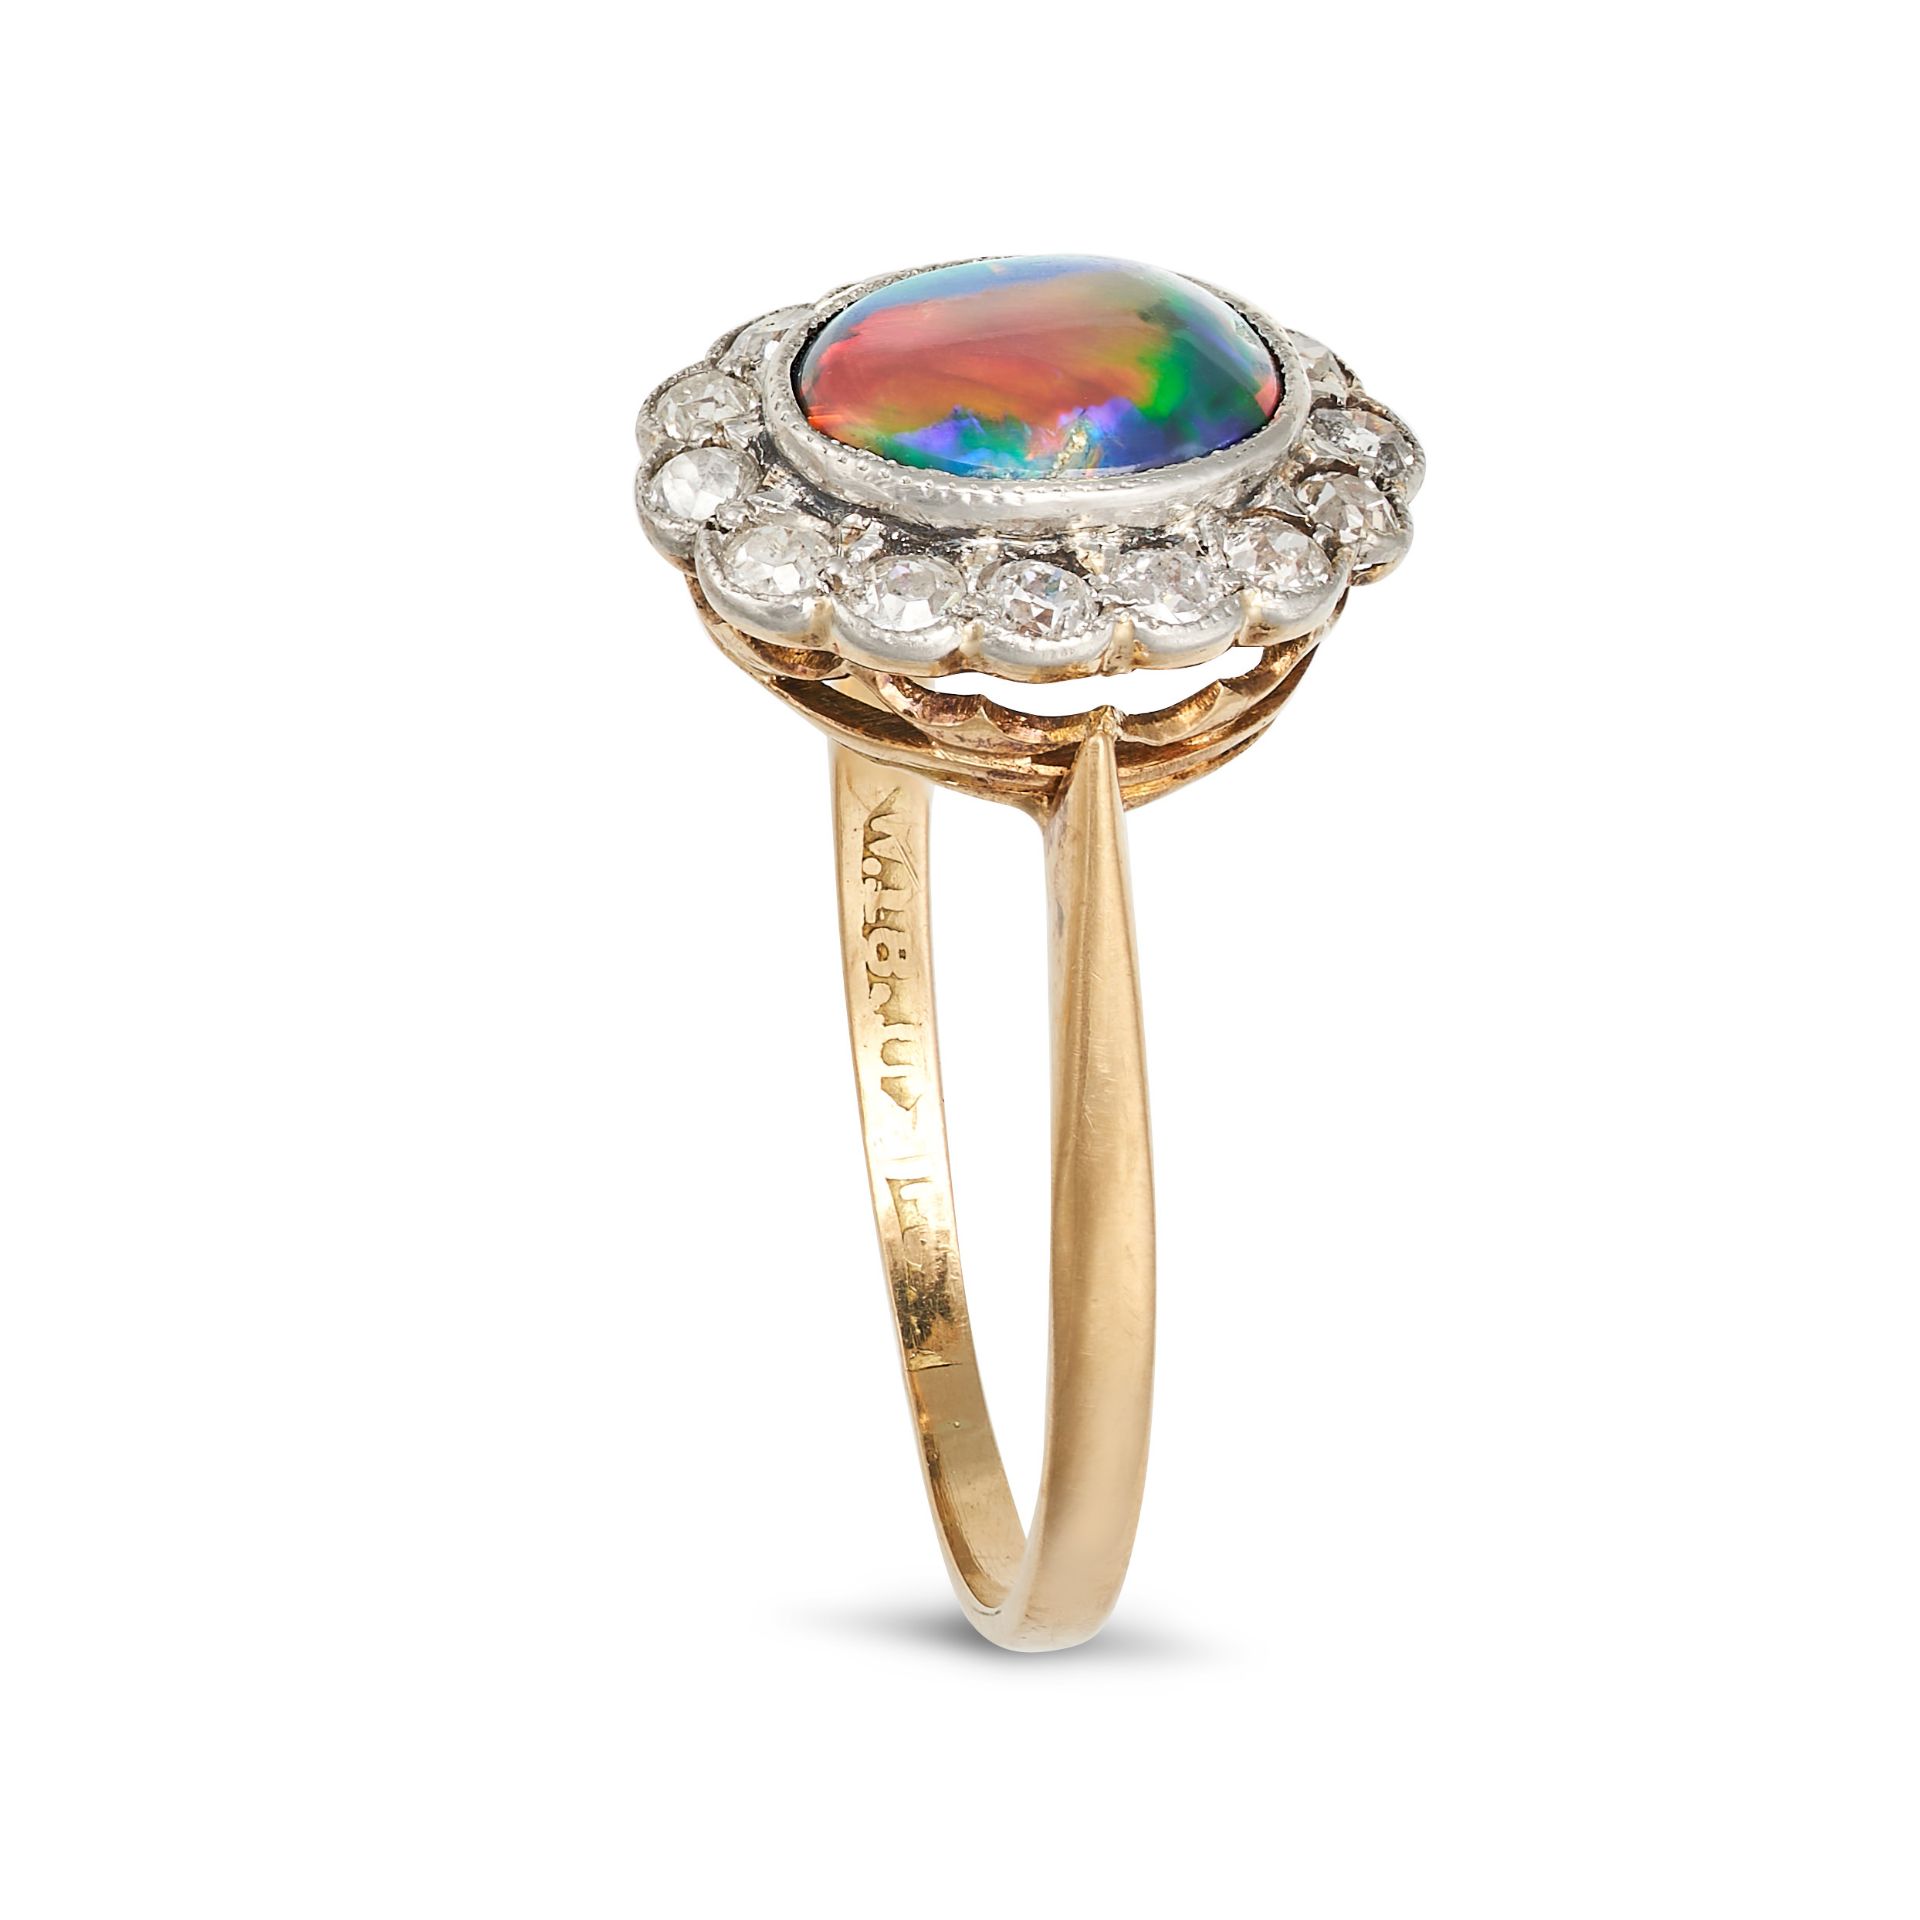 A BLACK OPAL AND DIAMOND CLUSTER RING in 18ct yellow gold, set with an oval cabochon black opal i... - Image 2 of 2